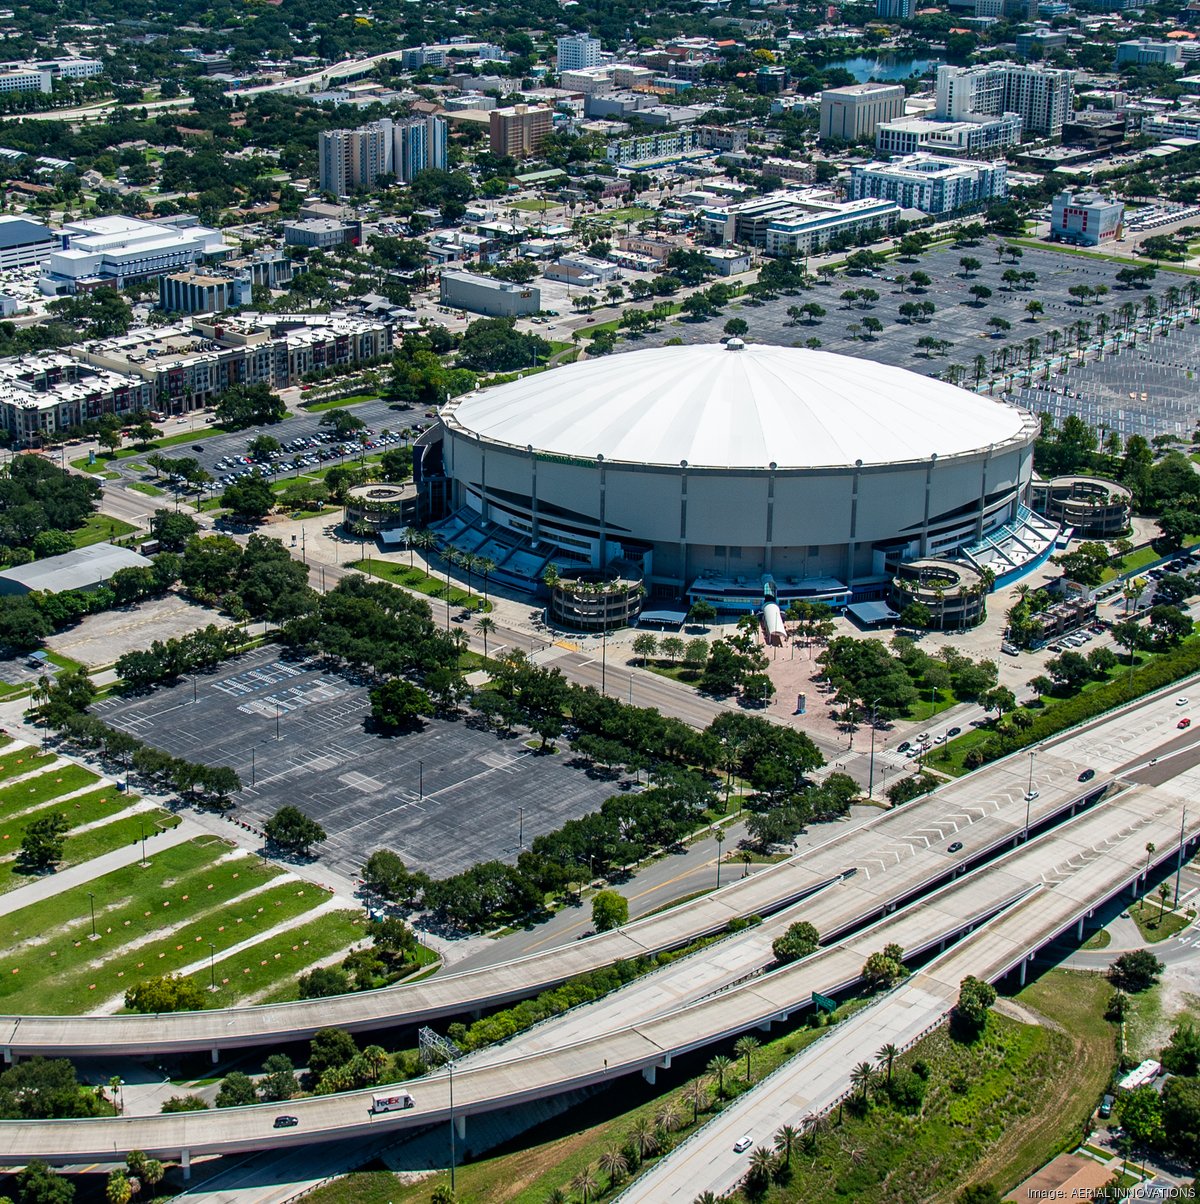 Tropicana Field has three potential graves under parking lot